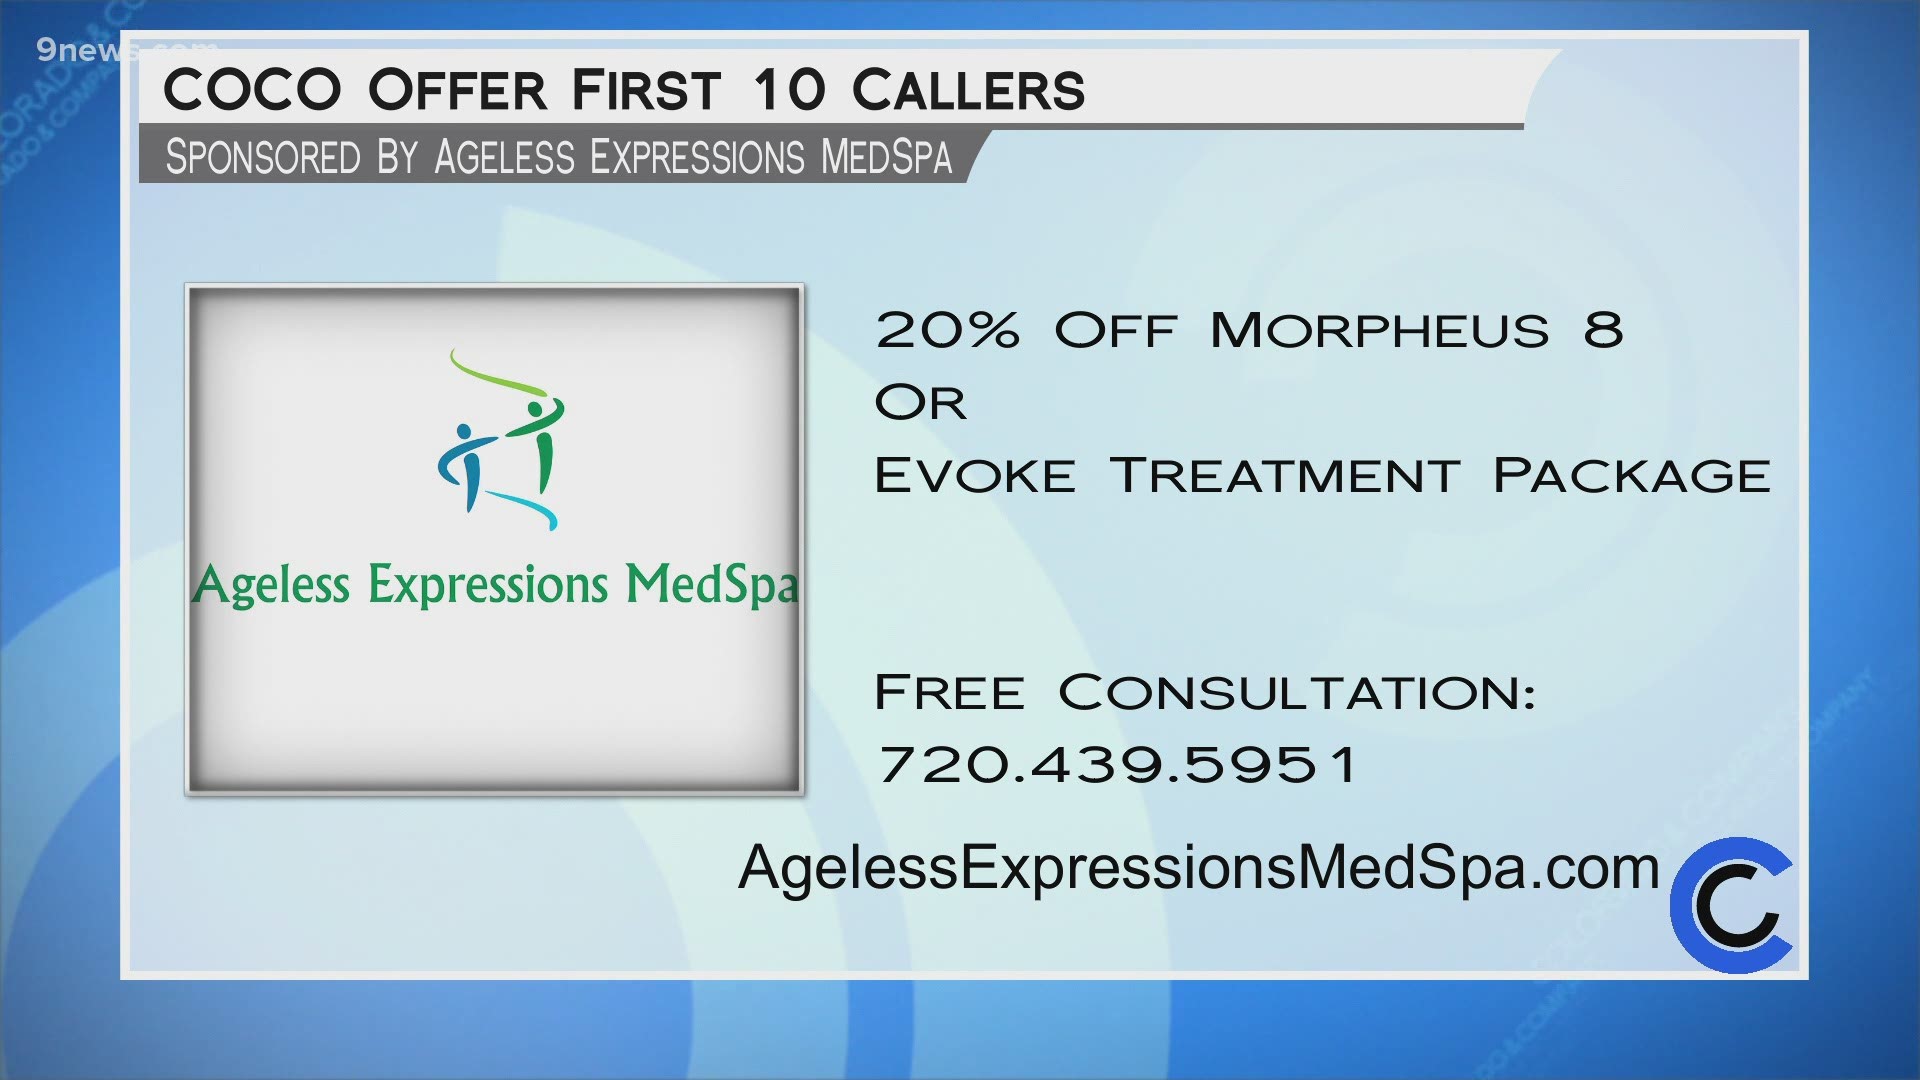 Right now you can get 20% off of your Morpheus 8 and Evoke treatments! Call 720.439.5951 or visit AgelessExressionsMedSpa.com to get started.